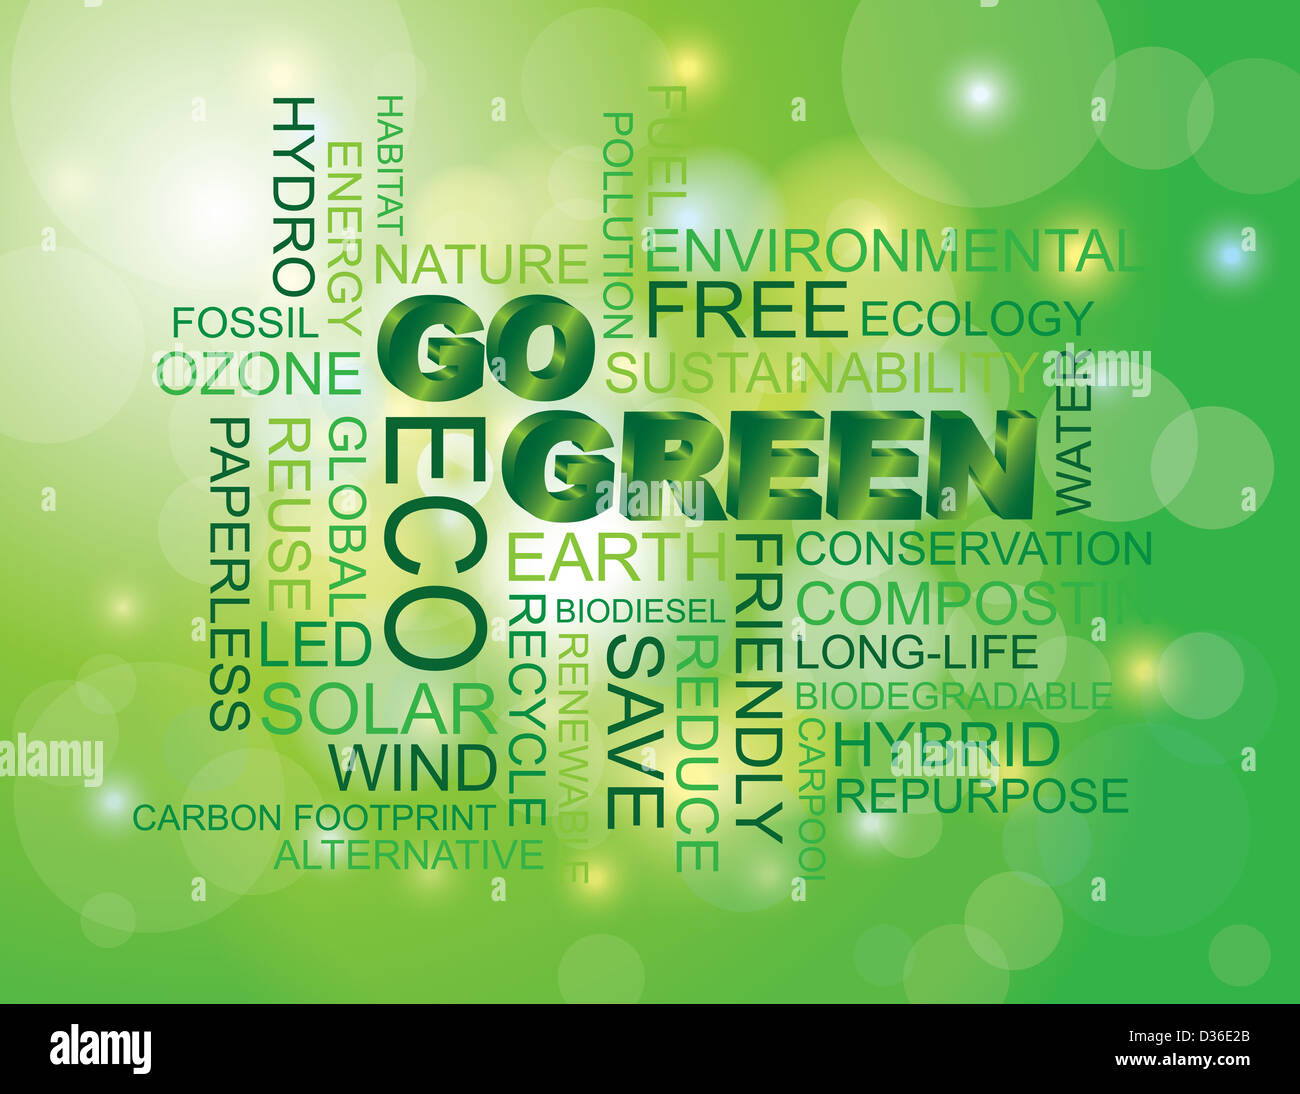 Go Green Eco Word Cloud Illustration Isolated on Green Bokeh Background Stock Photo